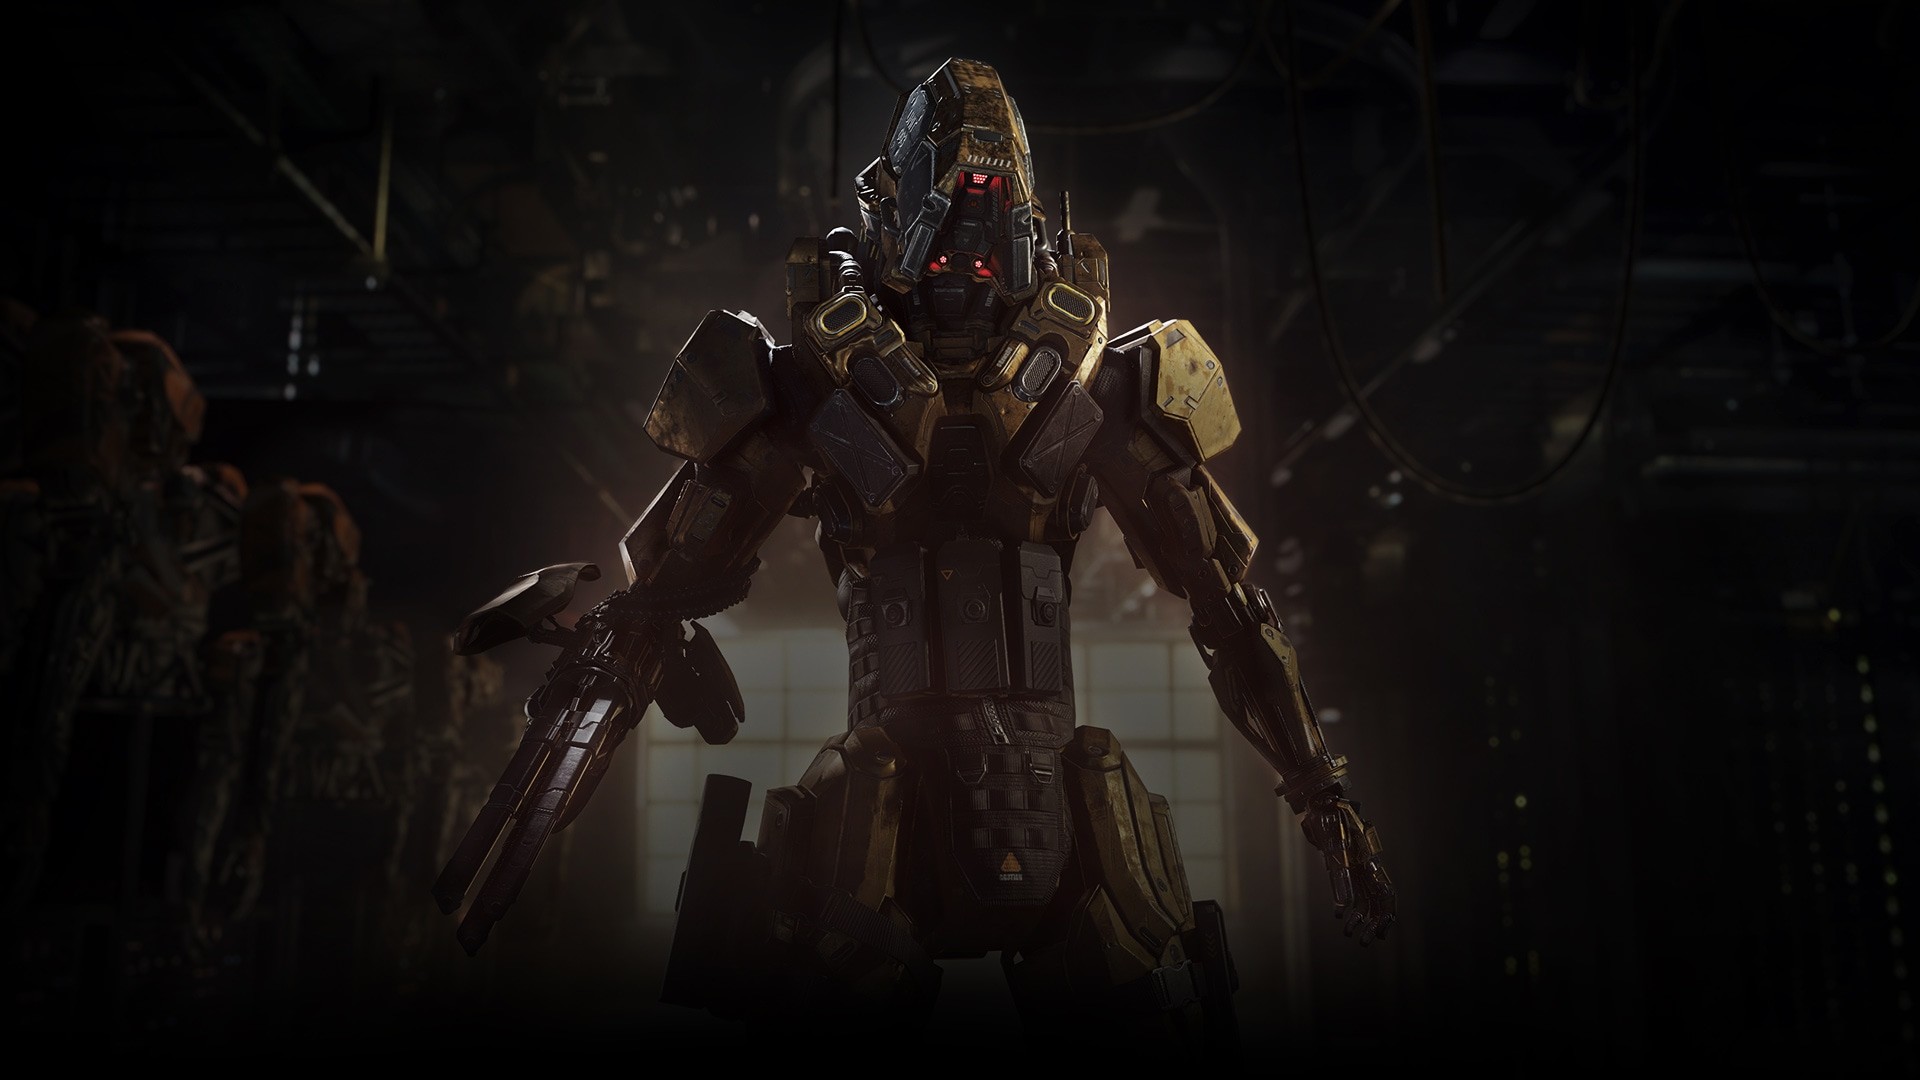 1920x1080 New hi-res images for the (8) known Black Ops 3 Specialist found